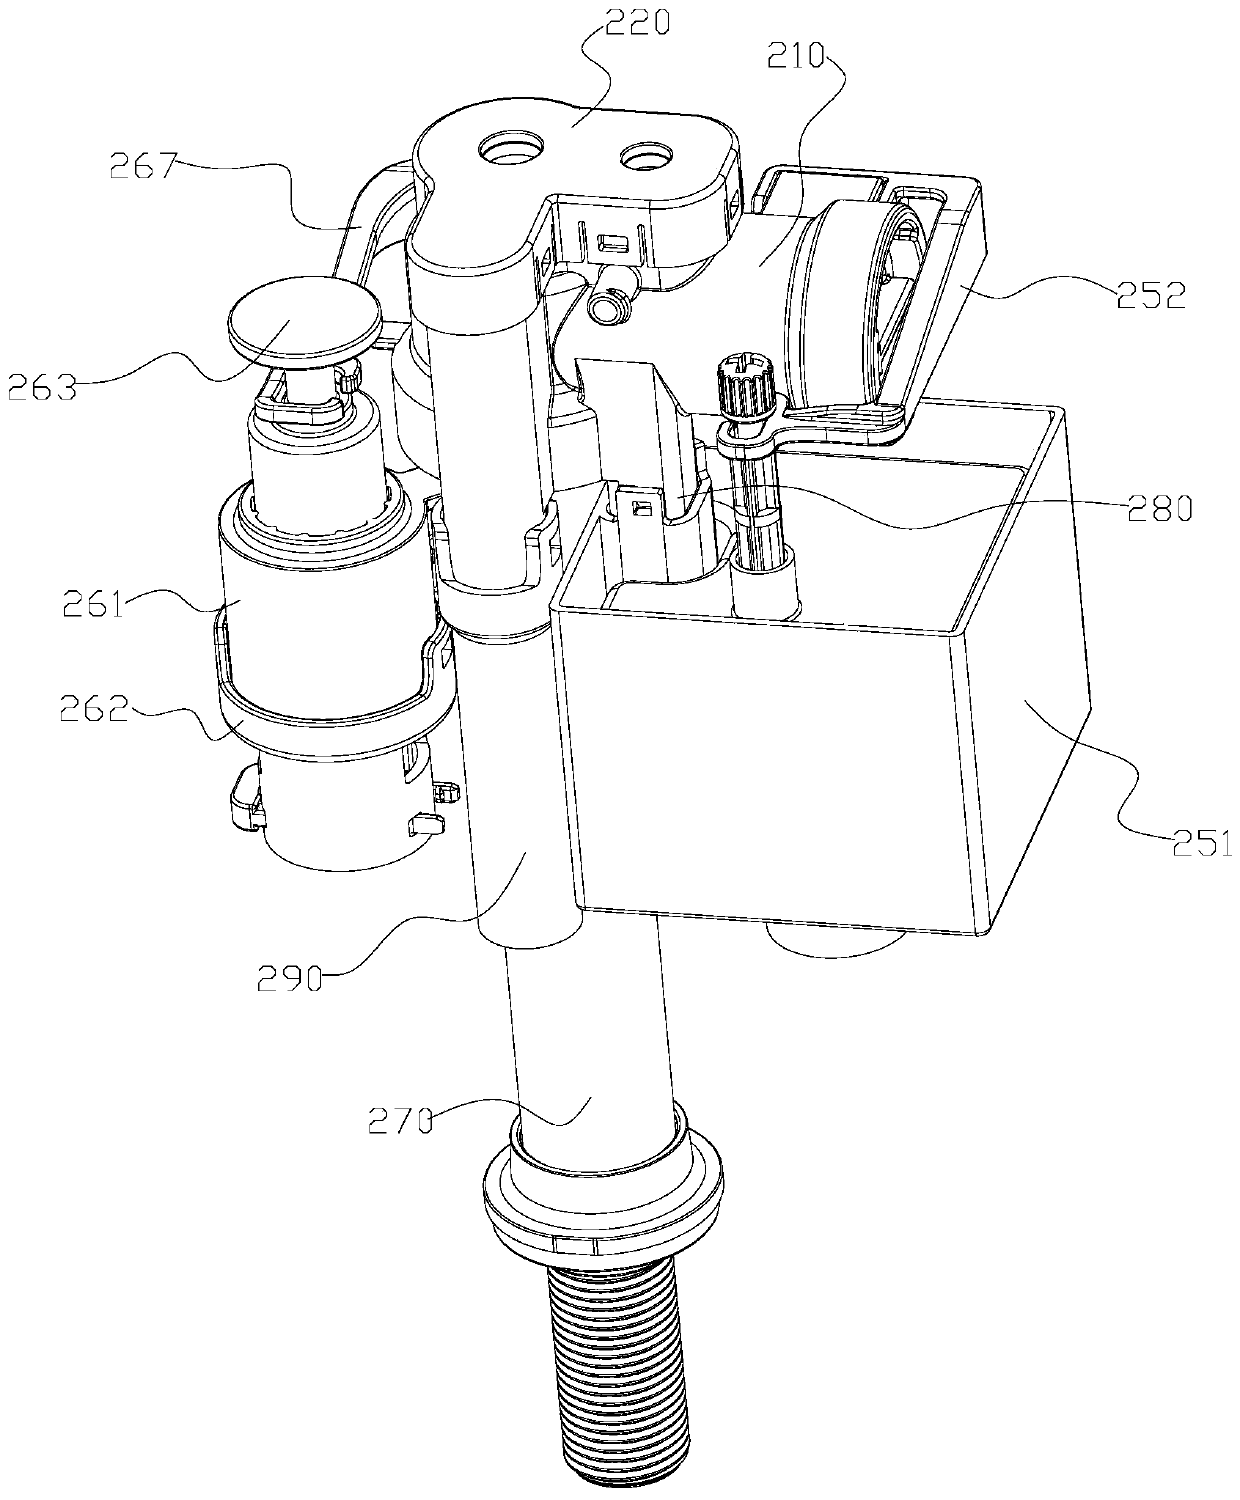 Water inlet valve and toilet flushing system with same